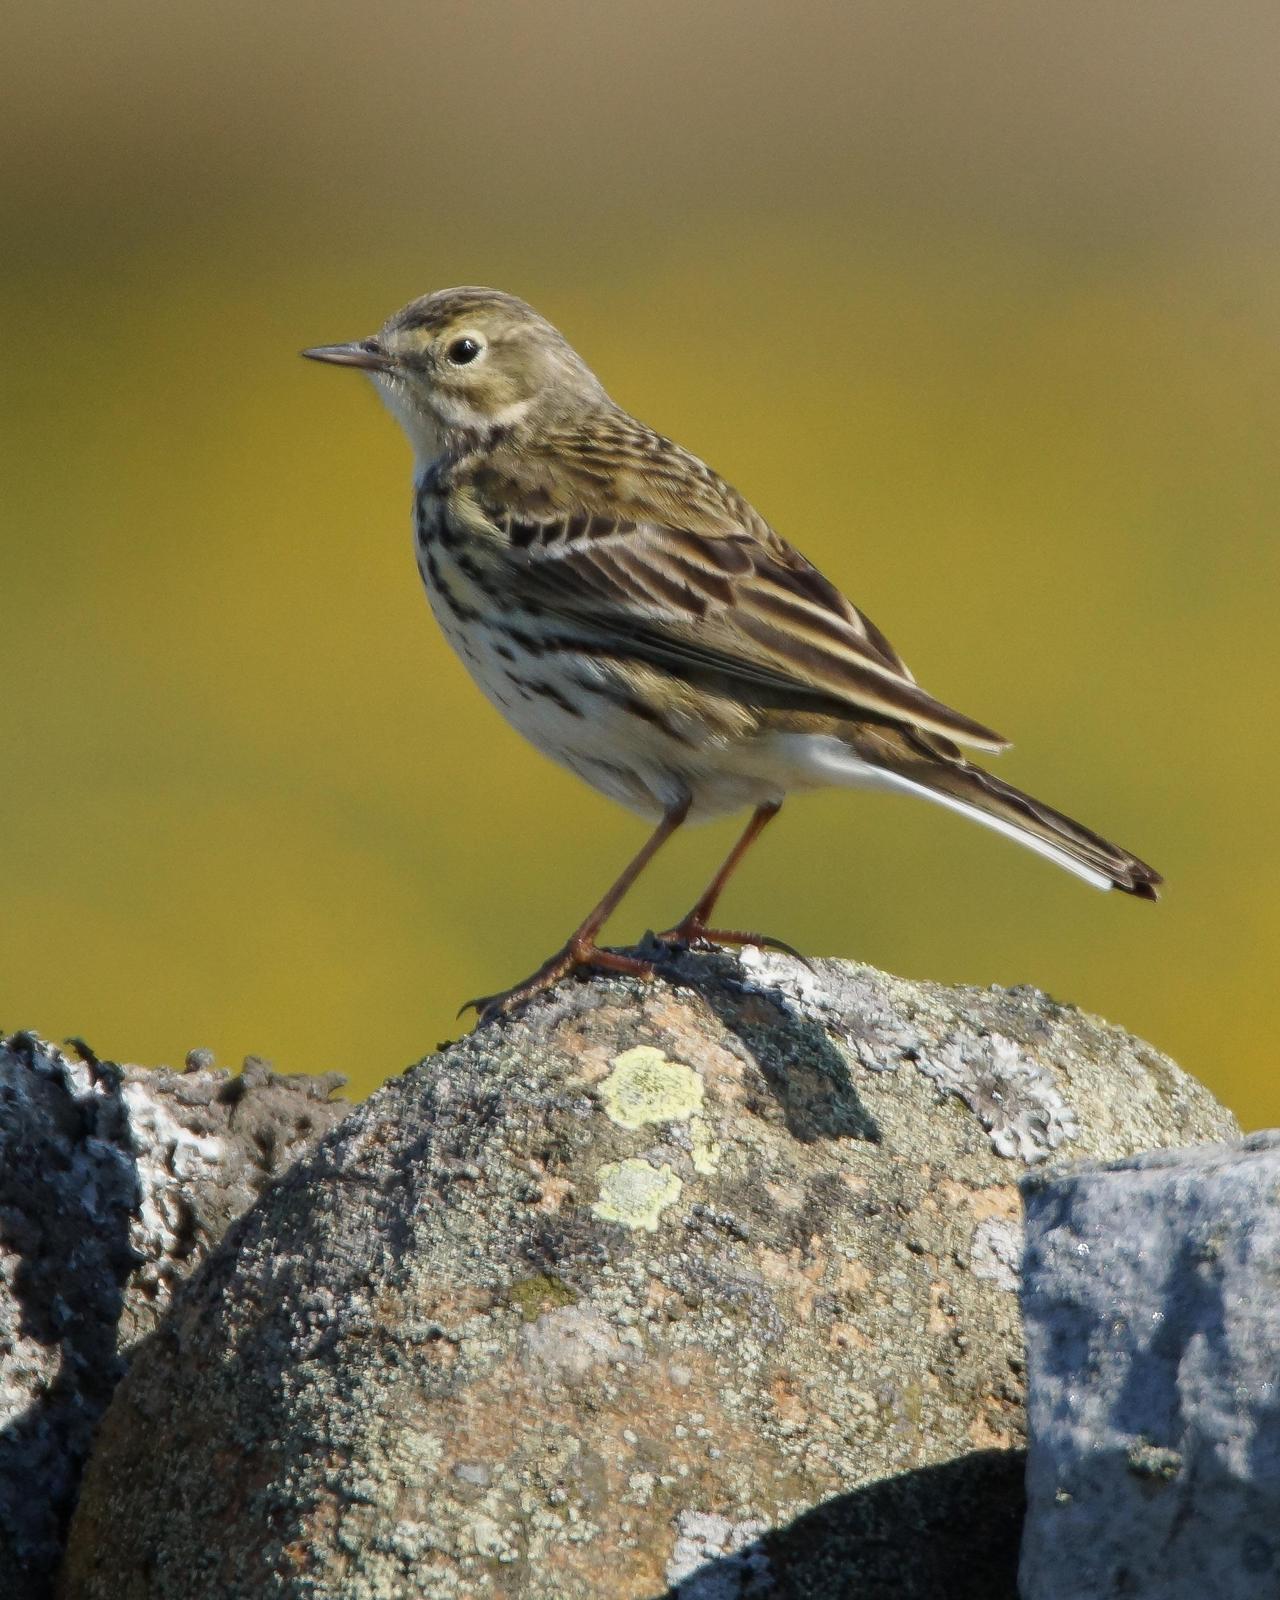 Meadow Pipit Photo by Steve Percival